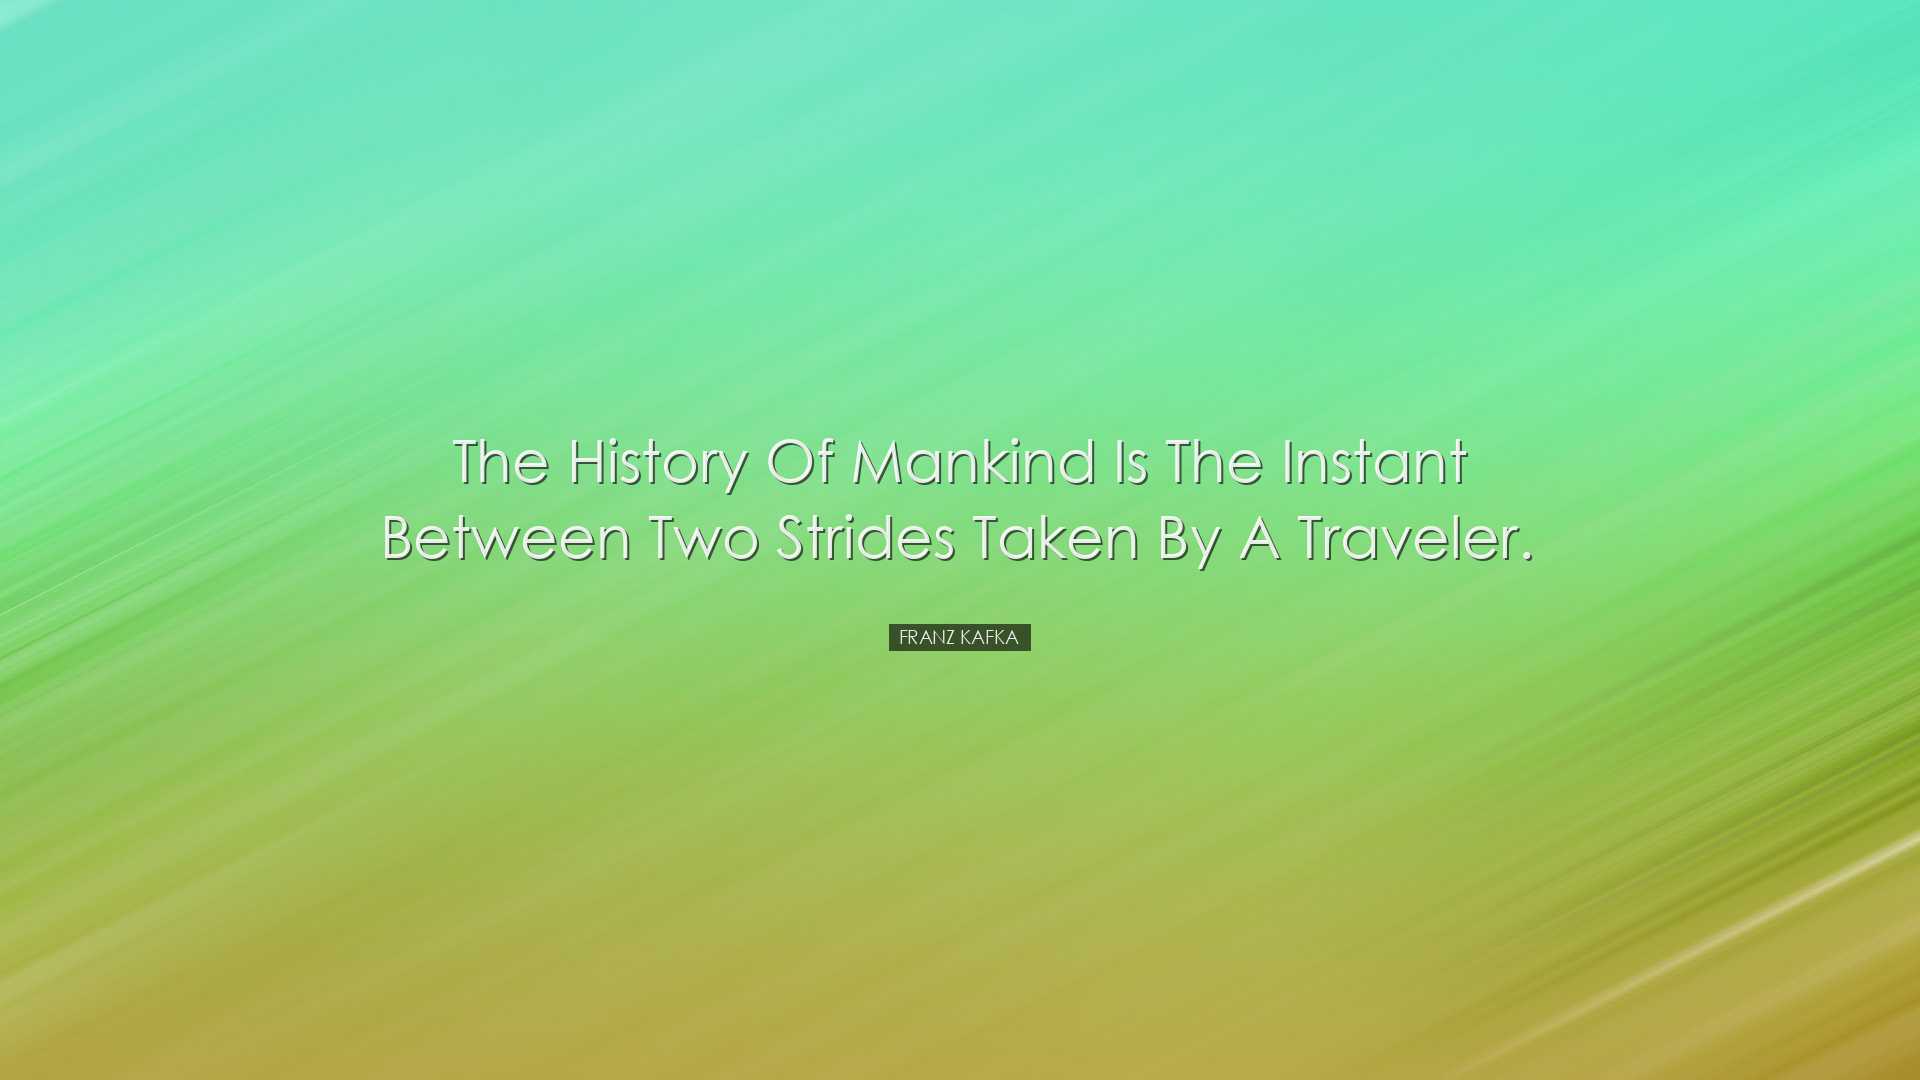 The history of mankind is the instant between two strides taken by